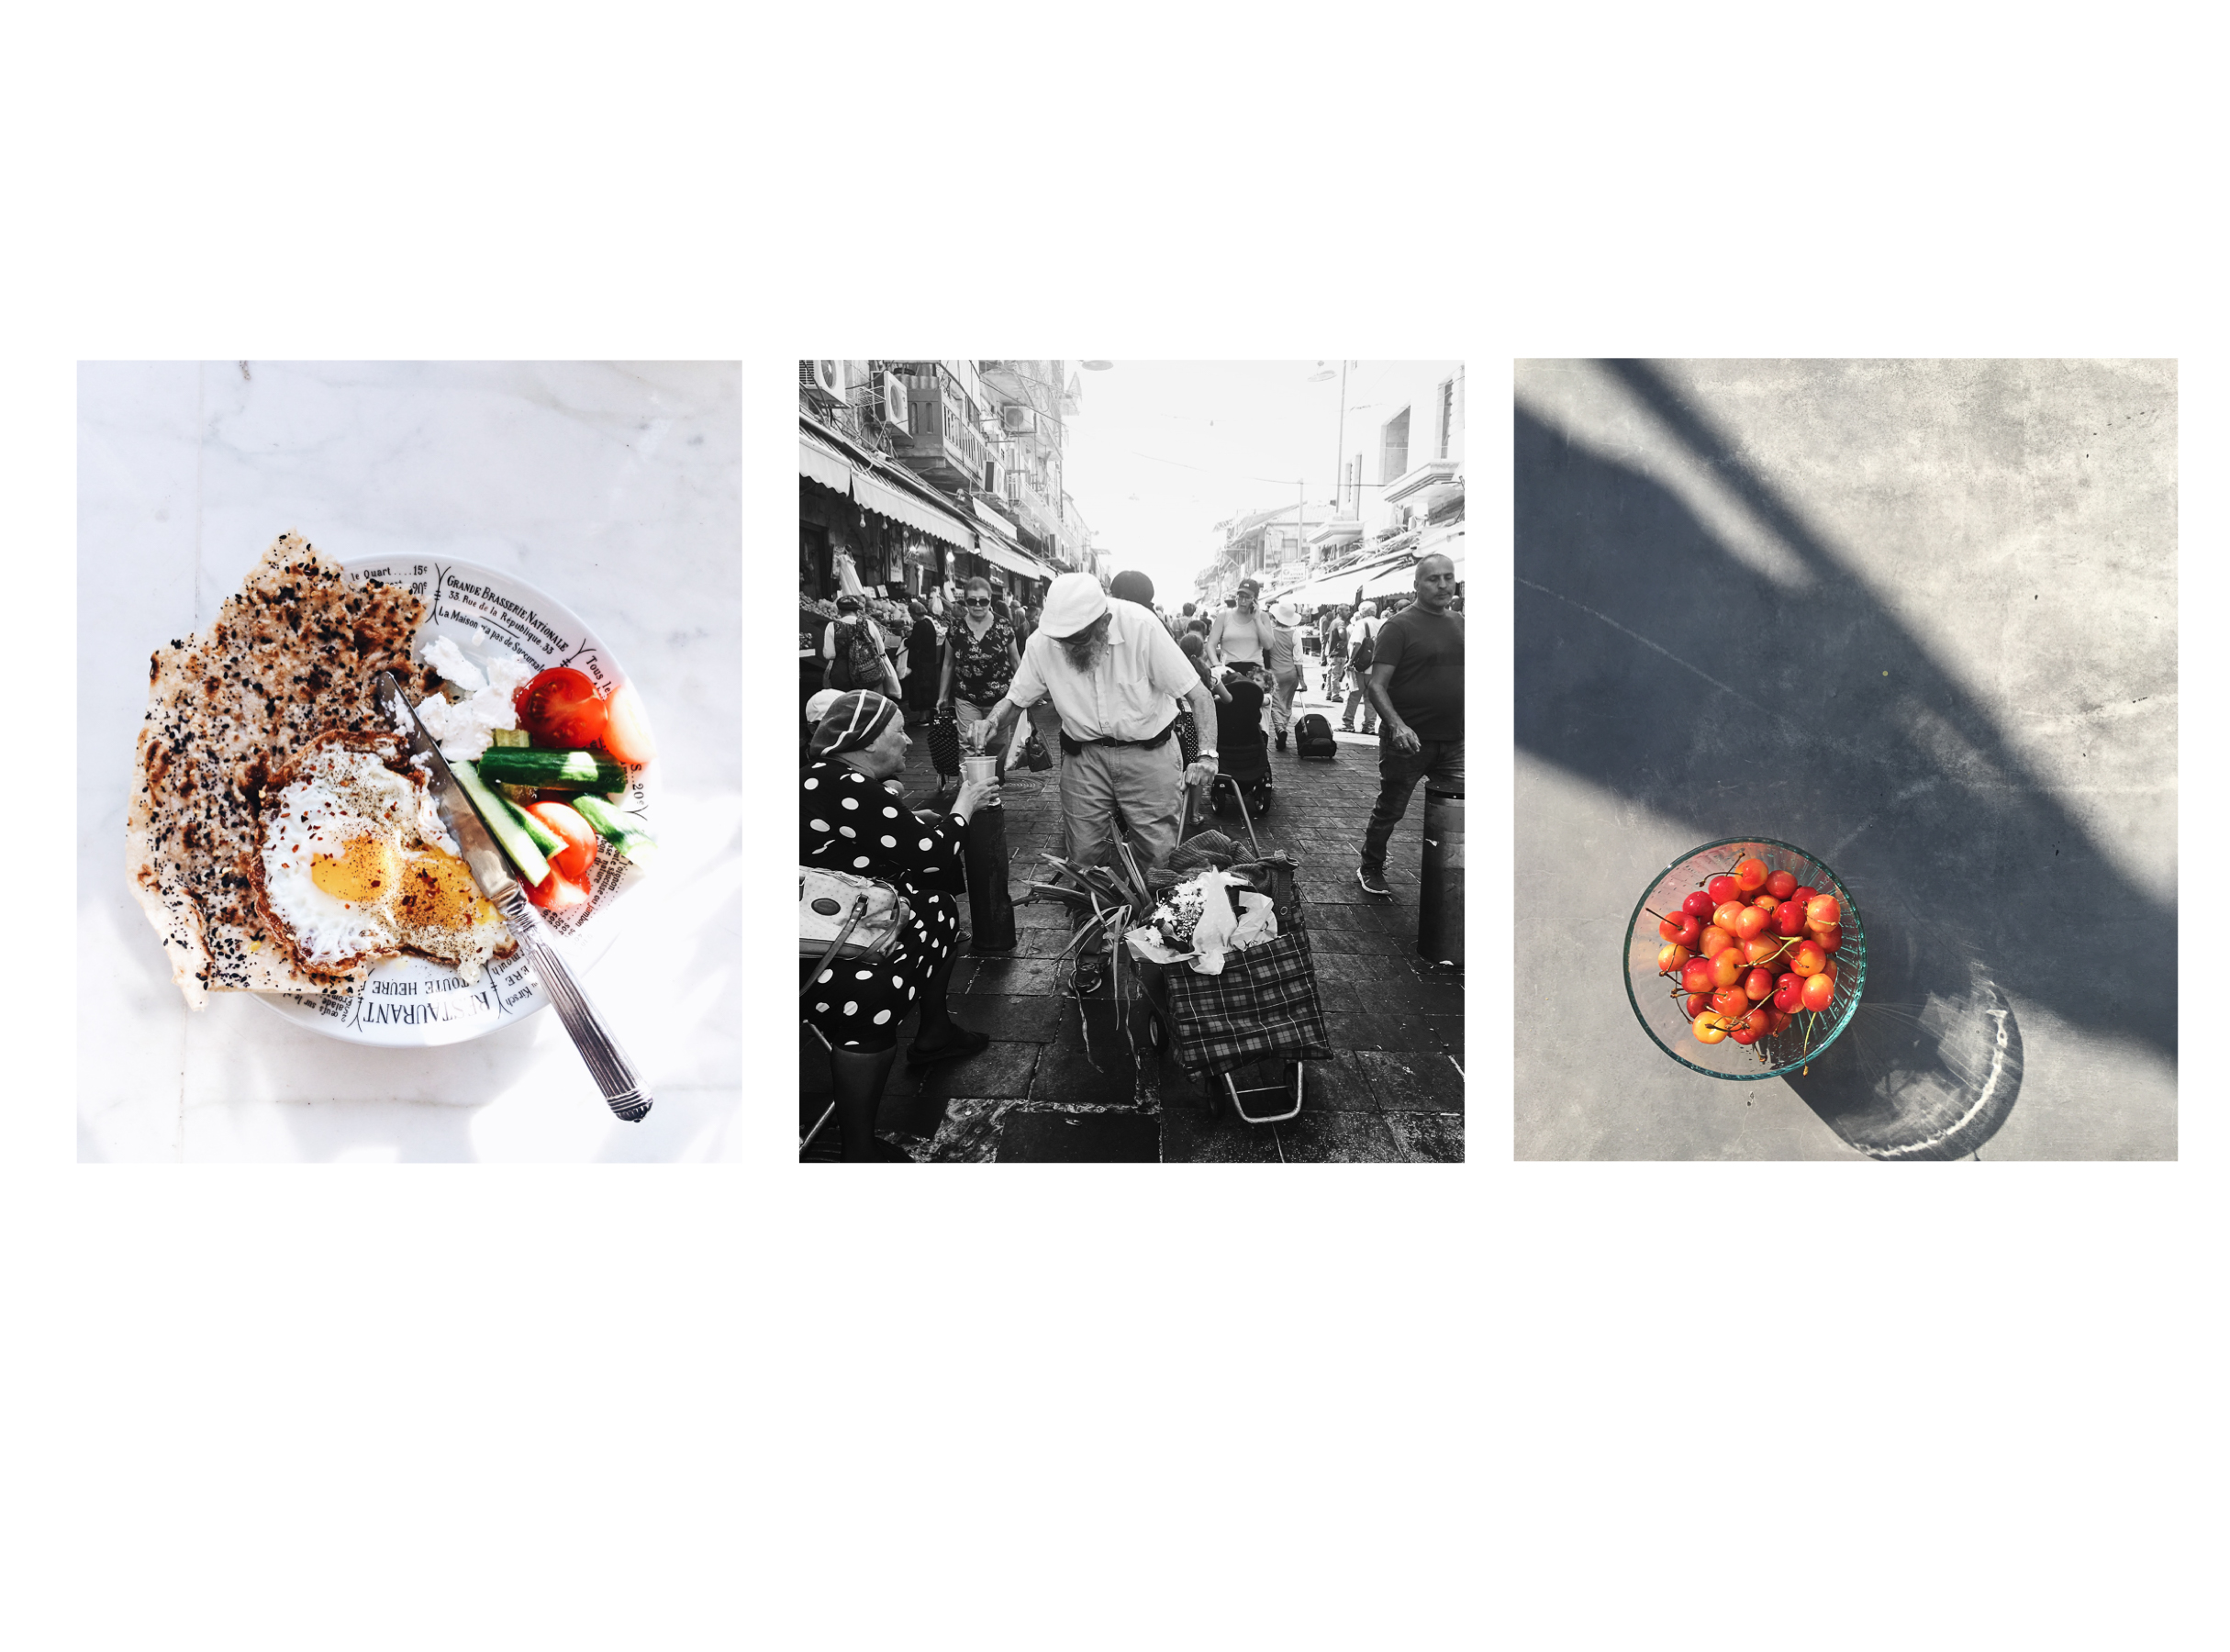 Phone Photography Guide e-Book | Gather a Table